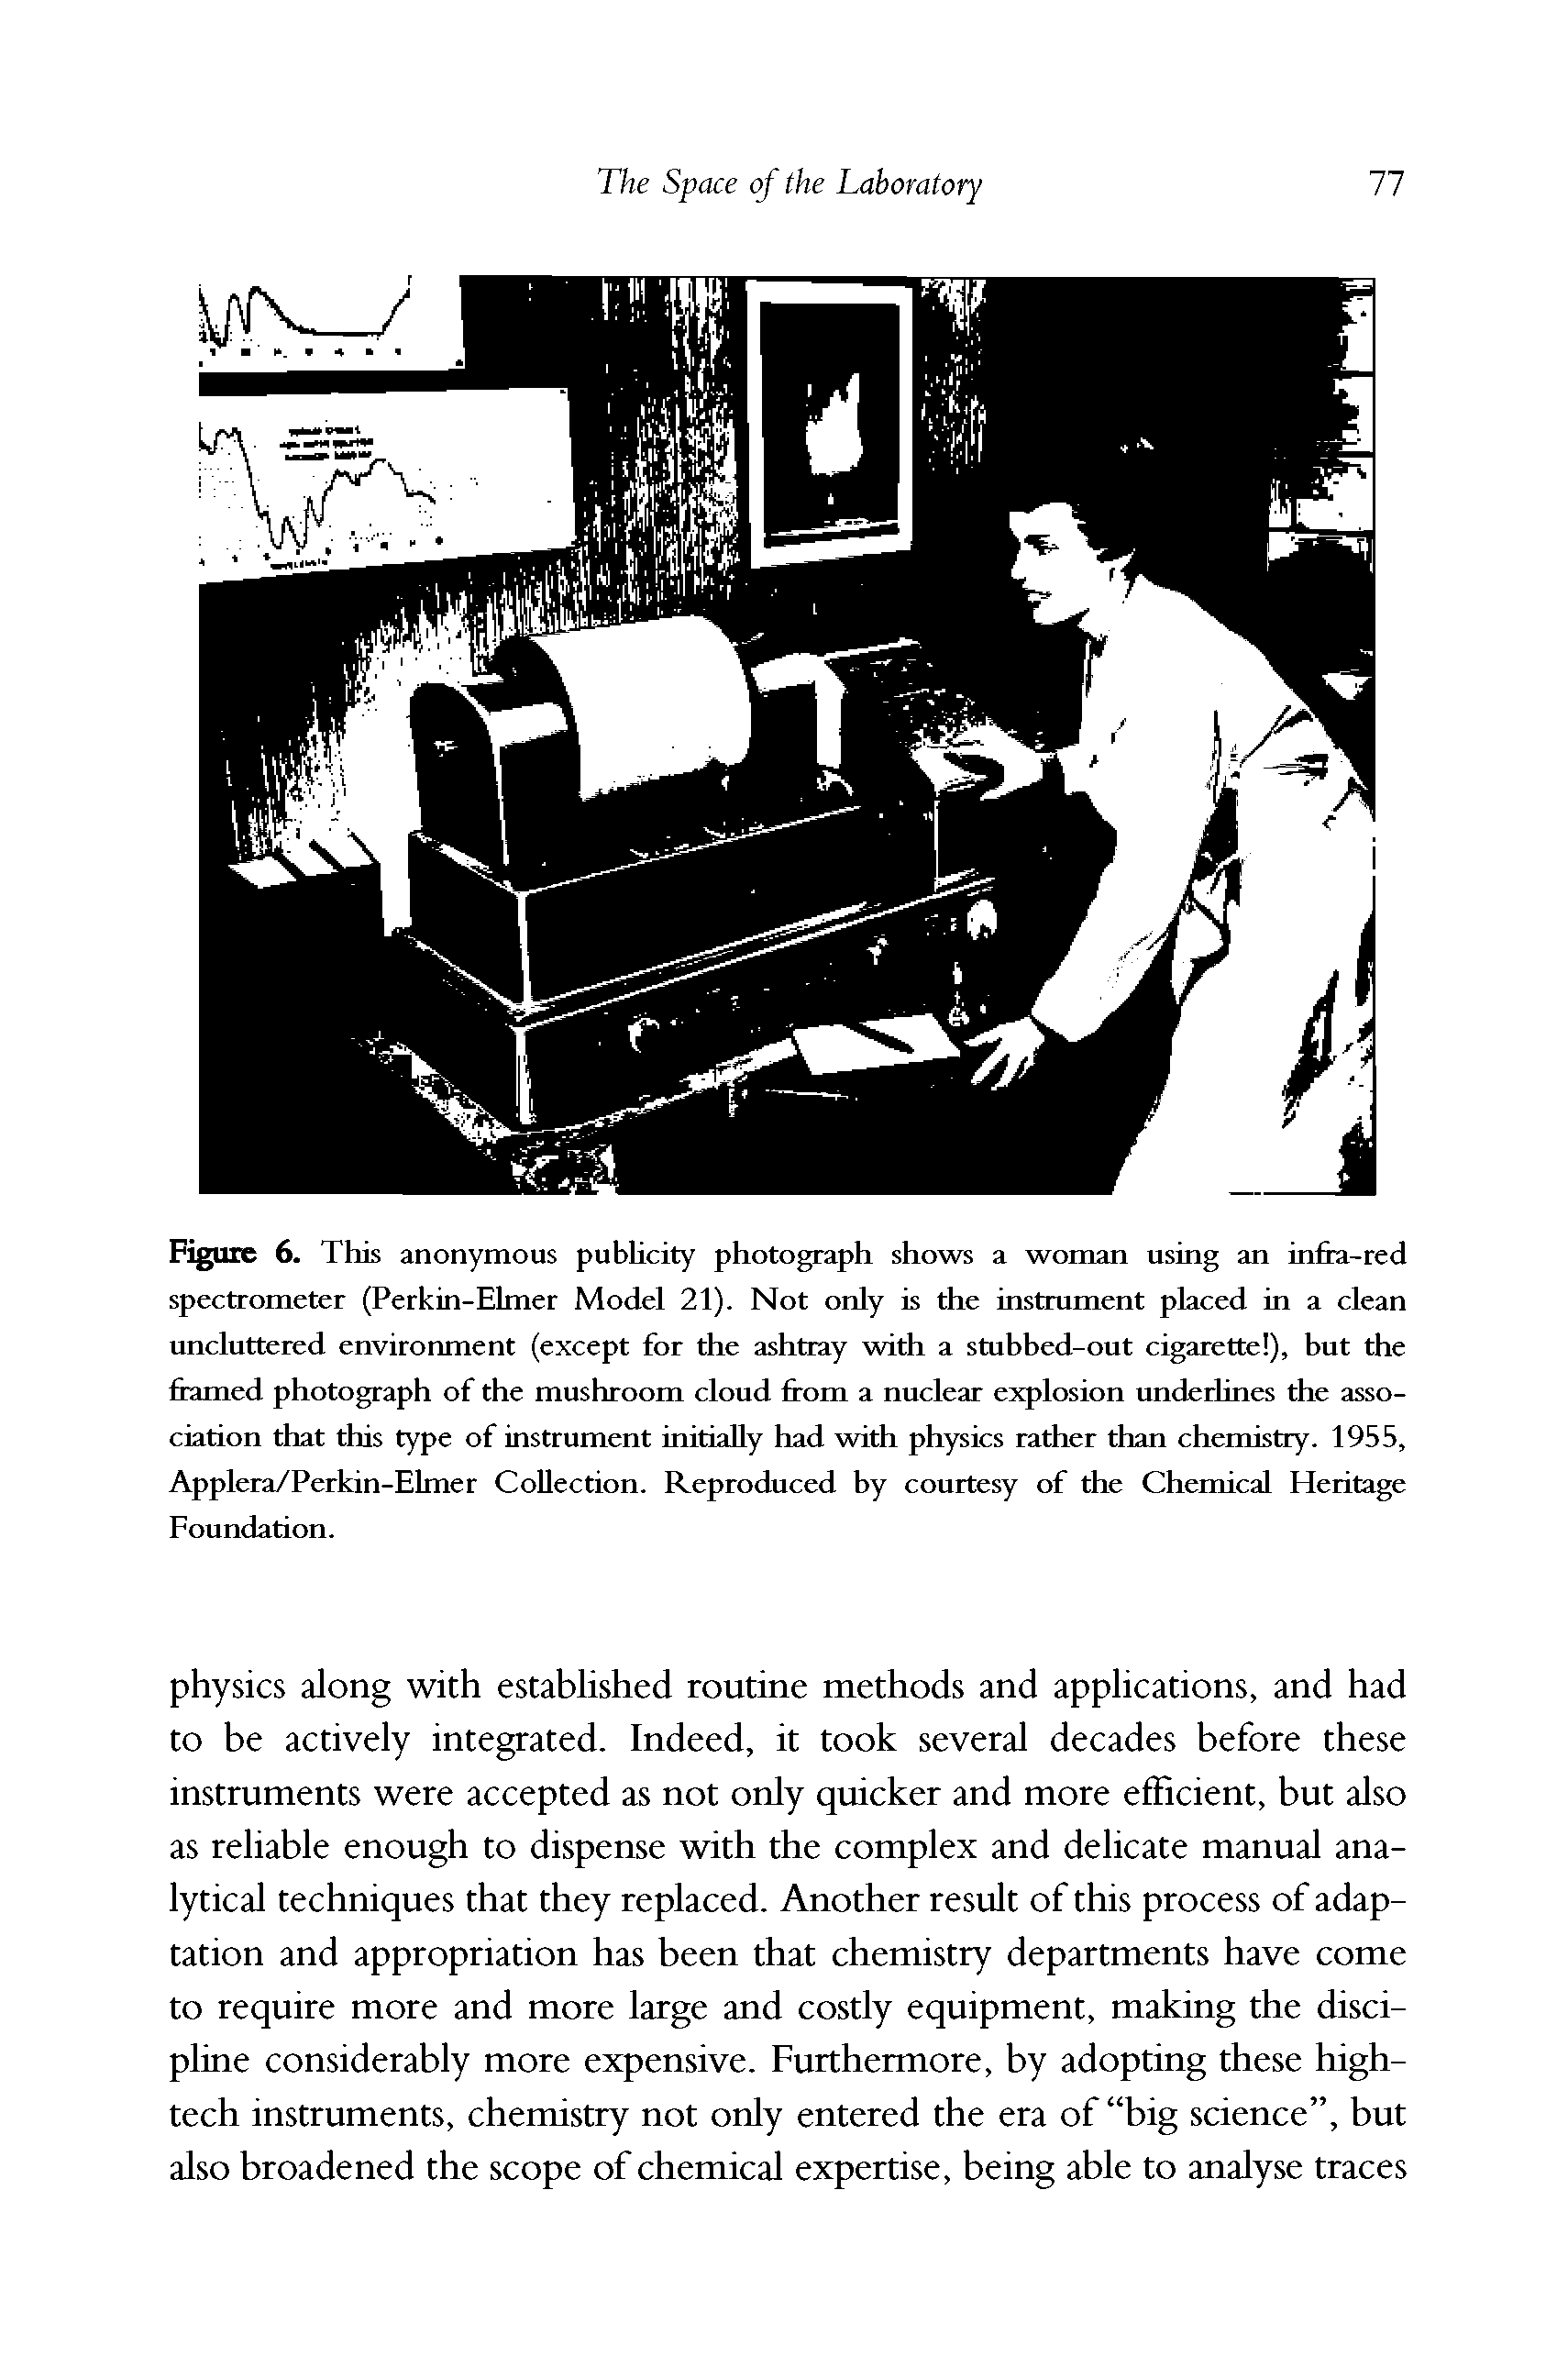 Figure 6. This anonymous publicity photograph shows a woman using an infra-red spectrometer (Perkin-Elmer Model 21). Not only is the instrument placed in a clean uncluttered environment (except for the ashtray with a stubbed-out cigarette ), but the flamed photograph of the mushroom cloud from a nuclear explosion underlines the association that this type of instrument initially had with physics rather than chemistry. 1955, Applera/Perkin-Elmer Collection. Reproduced by courtesy of the Chemical Heritage Foundation.